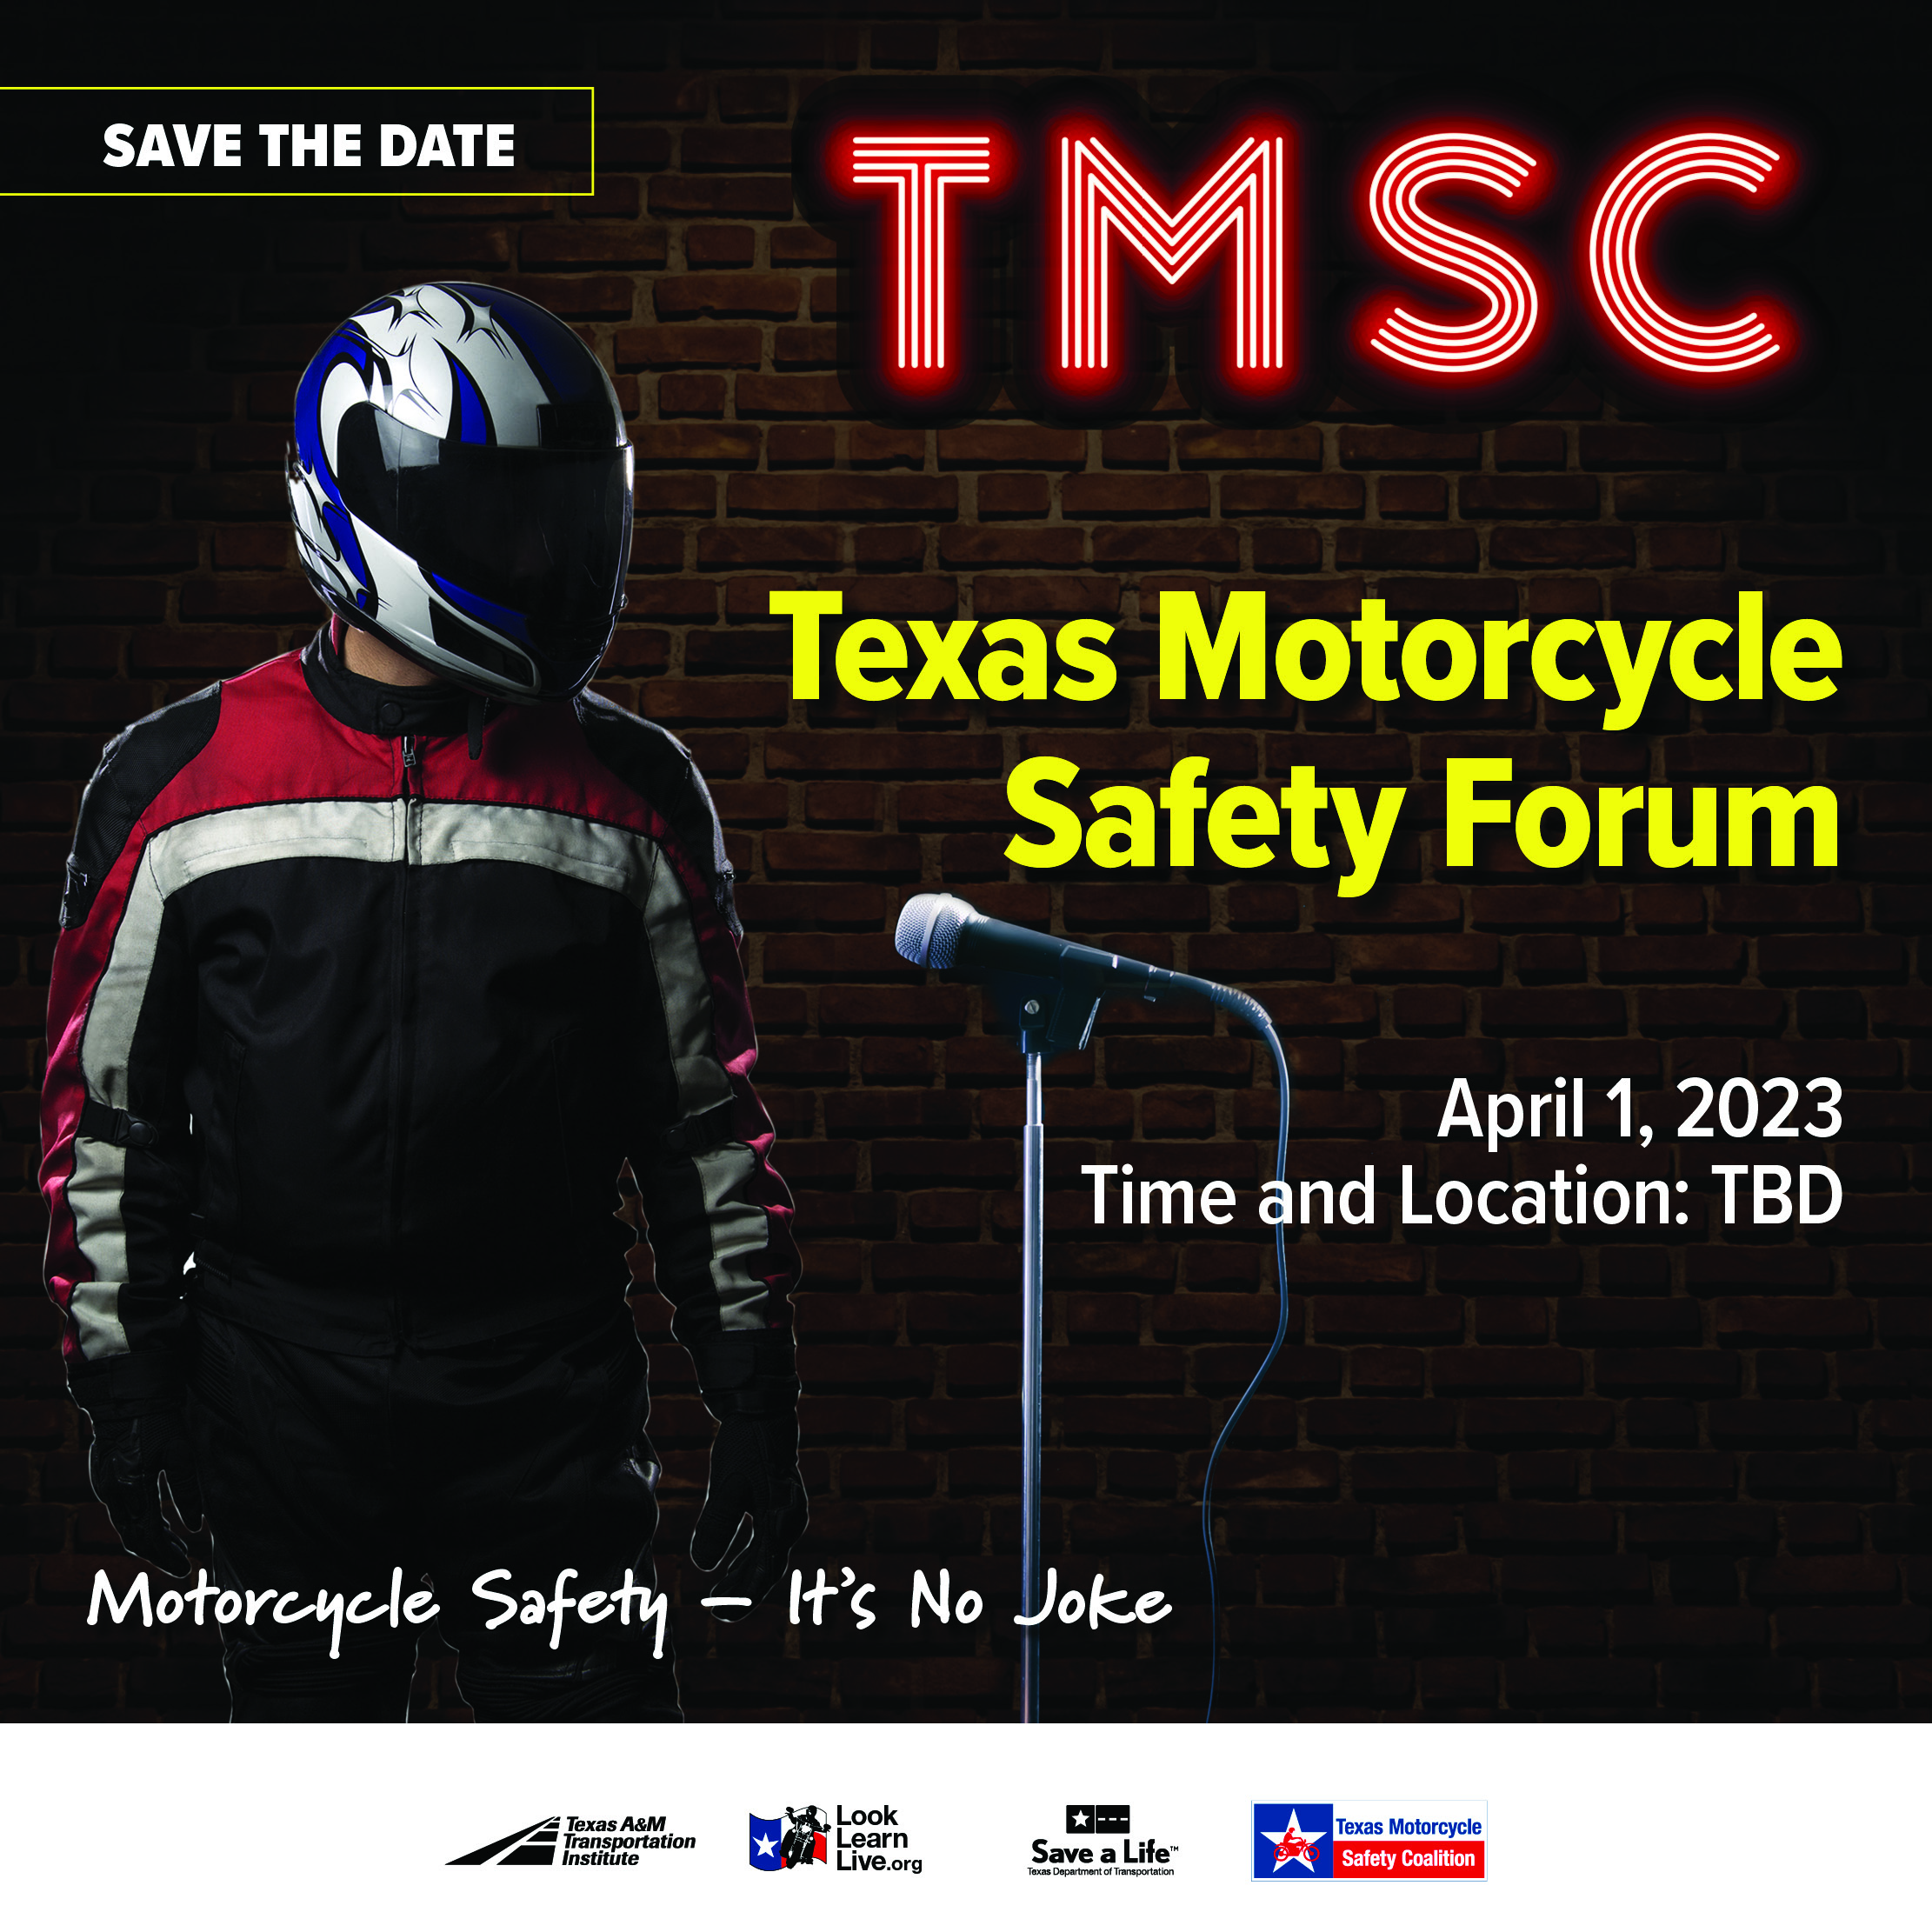 Save the date graphic for the 2023 Texas Motorcycle Safety Forum.